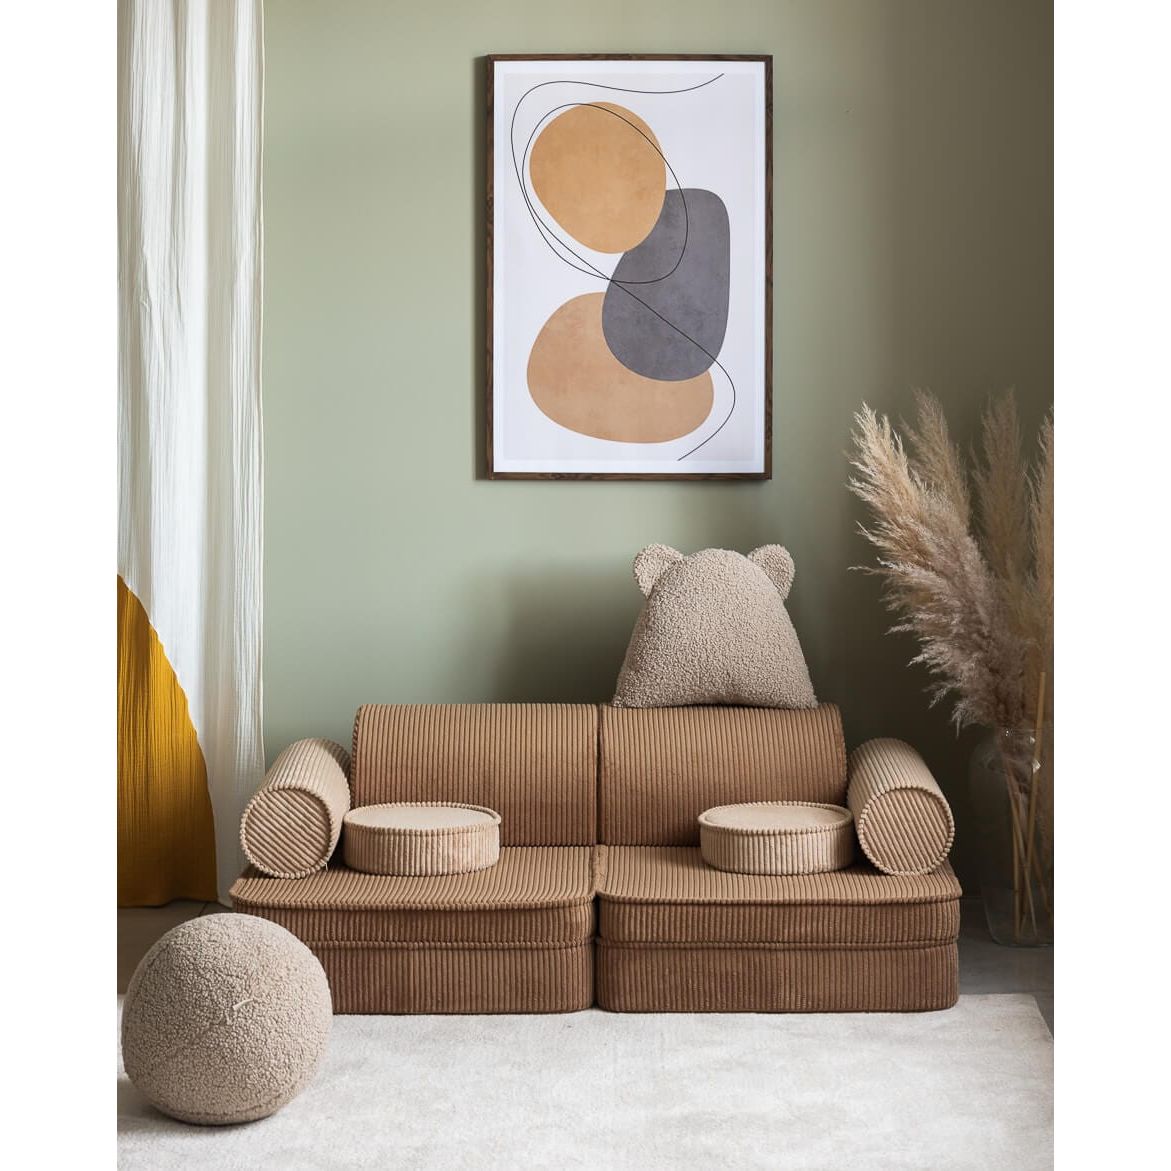 Wigiwama Toffee Settee in front of wall art